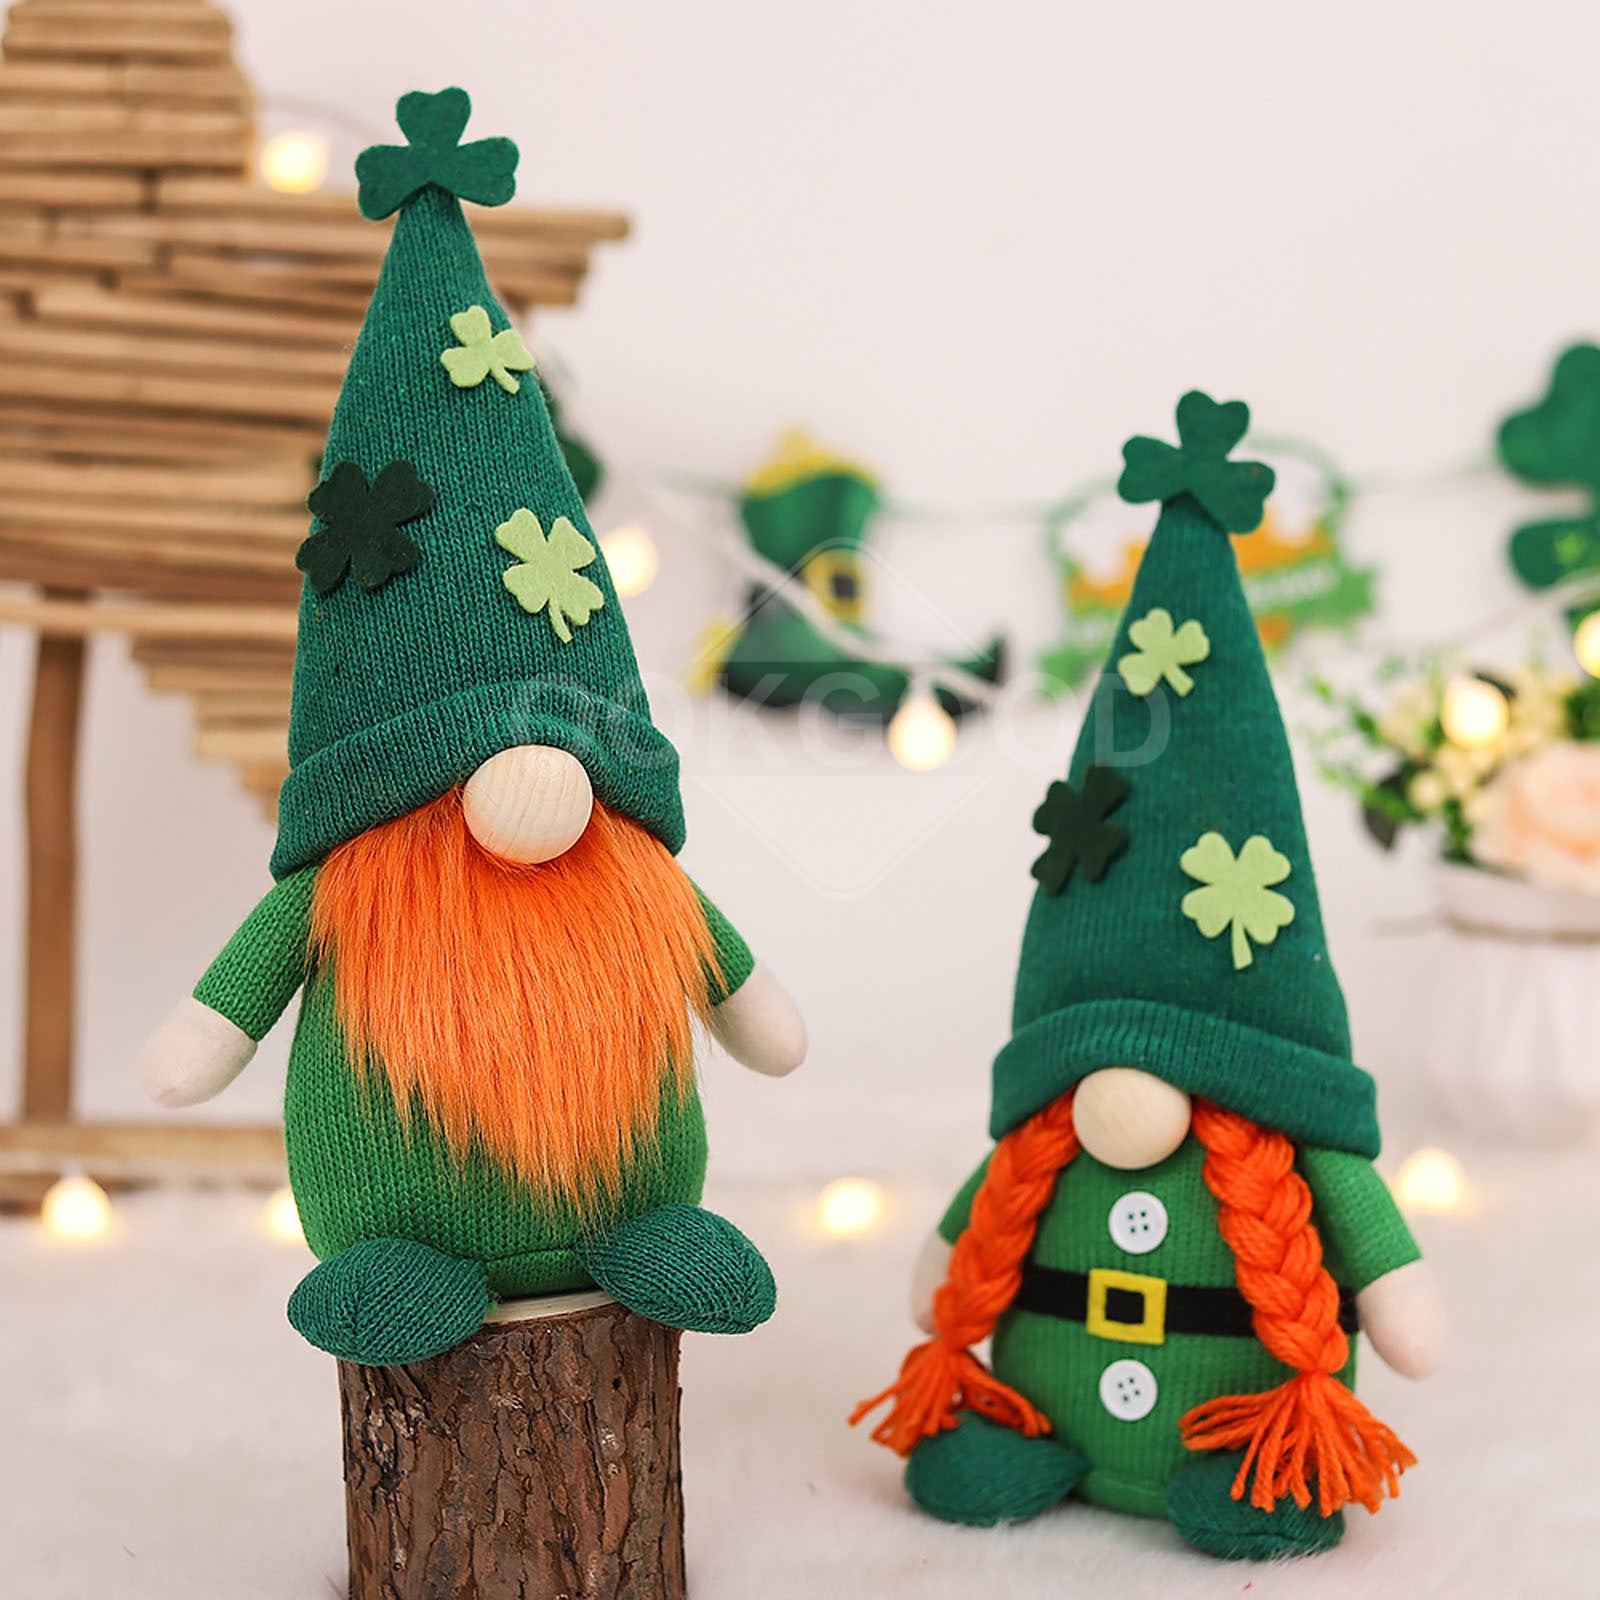 Adorable St. Patrick's Day Gnome Couple For Holiday Gift